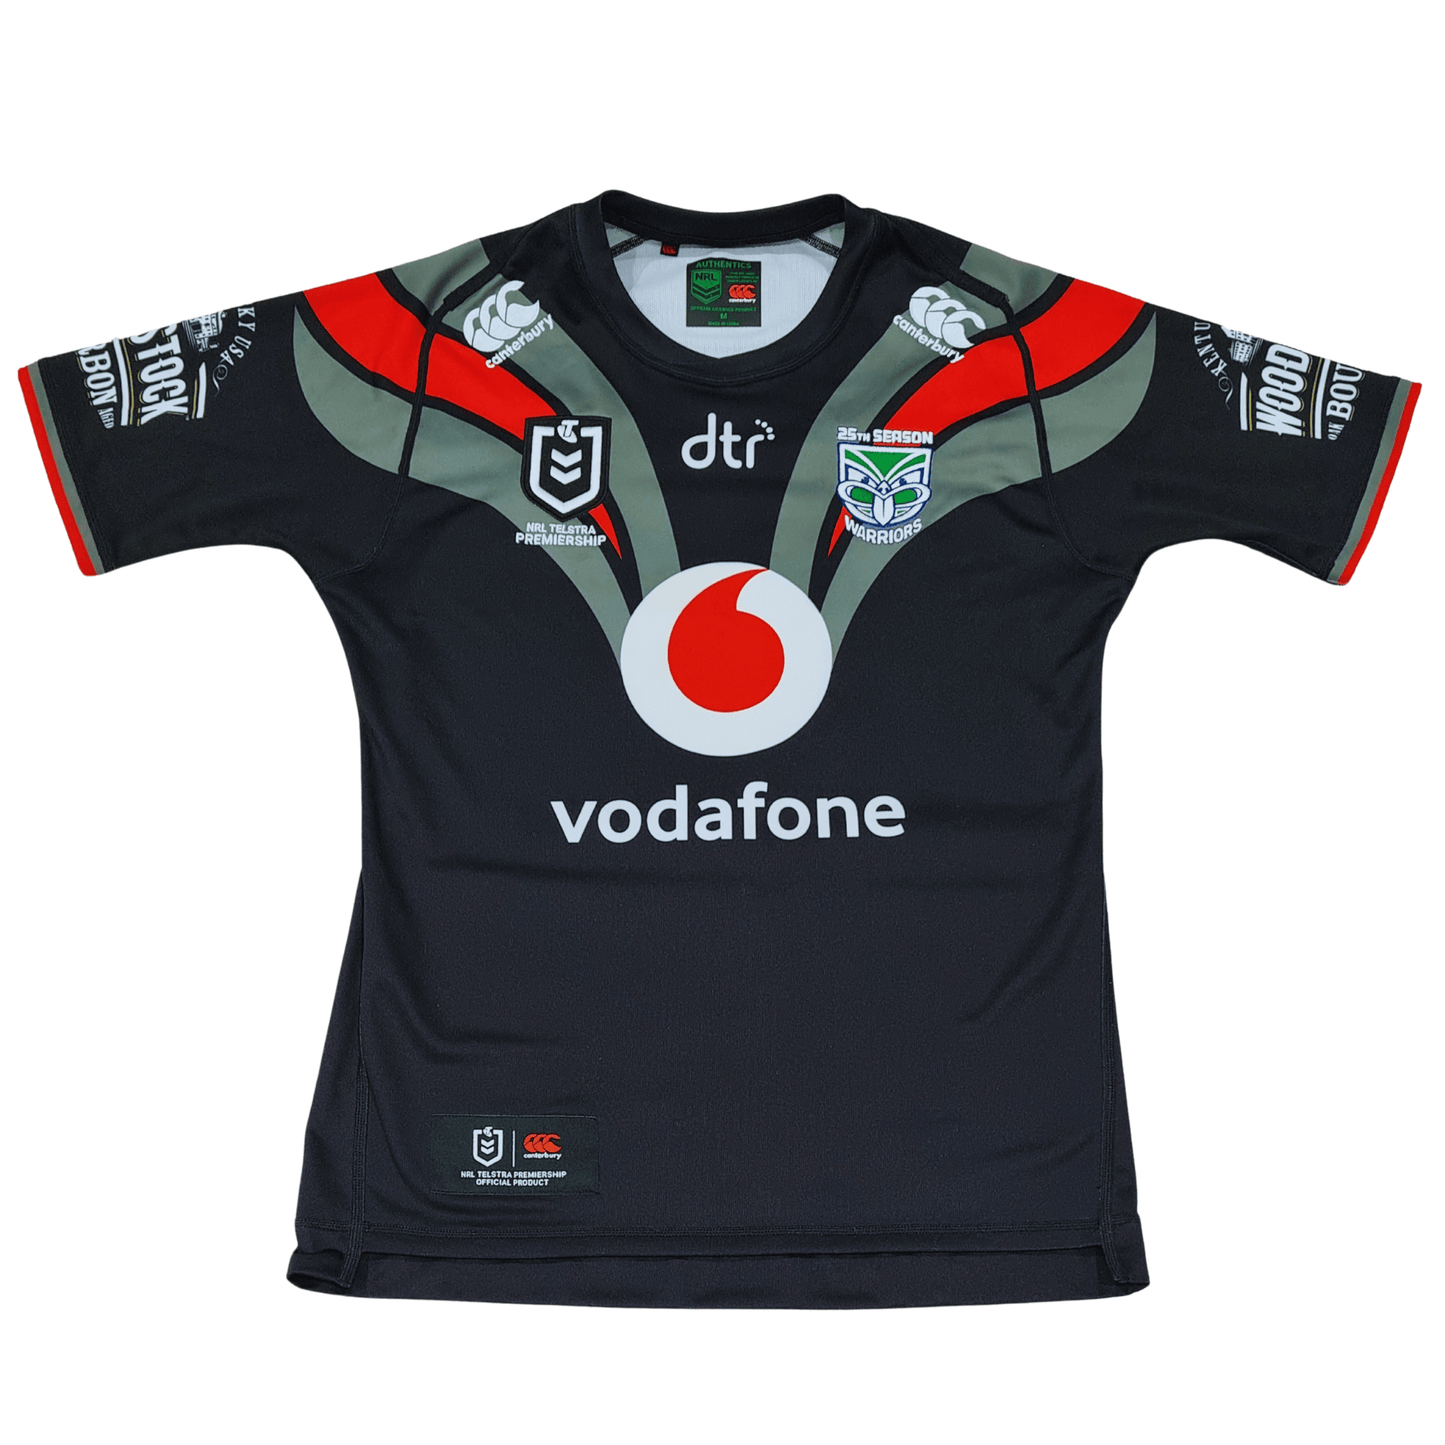 A men's size medium, black and red Canterbury New Zealand Warriors 2019 Away jersey with the word Vodafone prominently displayed.